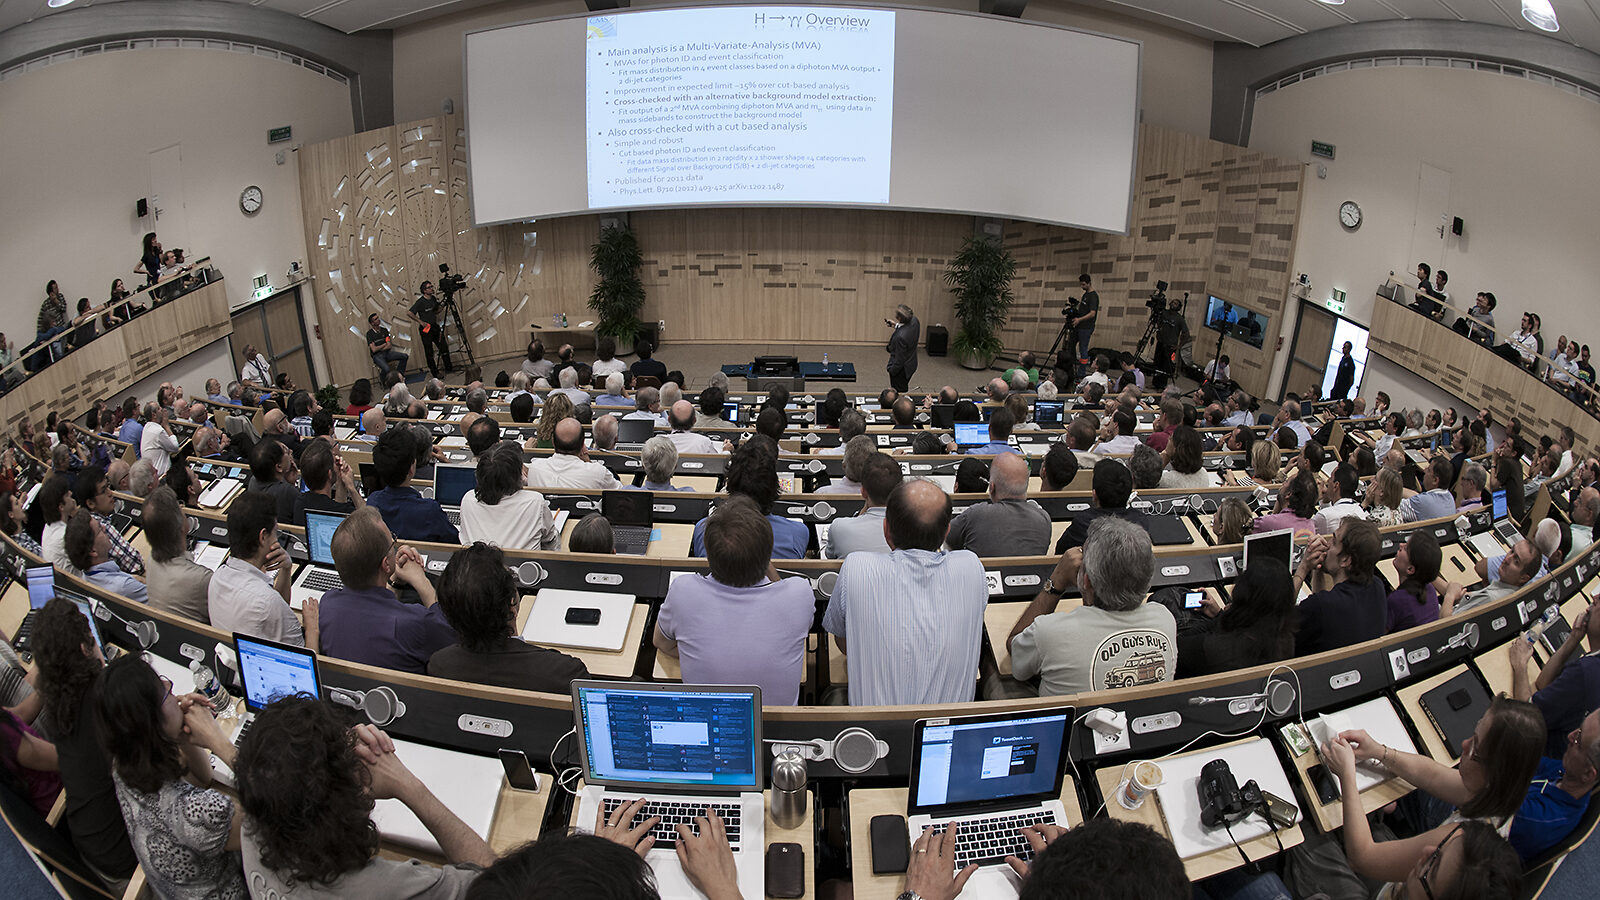 Photo from the back of a crowded conference room on the day of the Higgs announcement